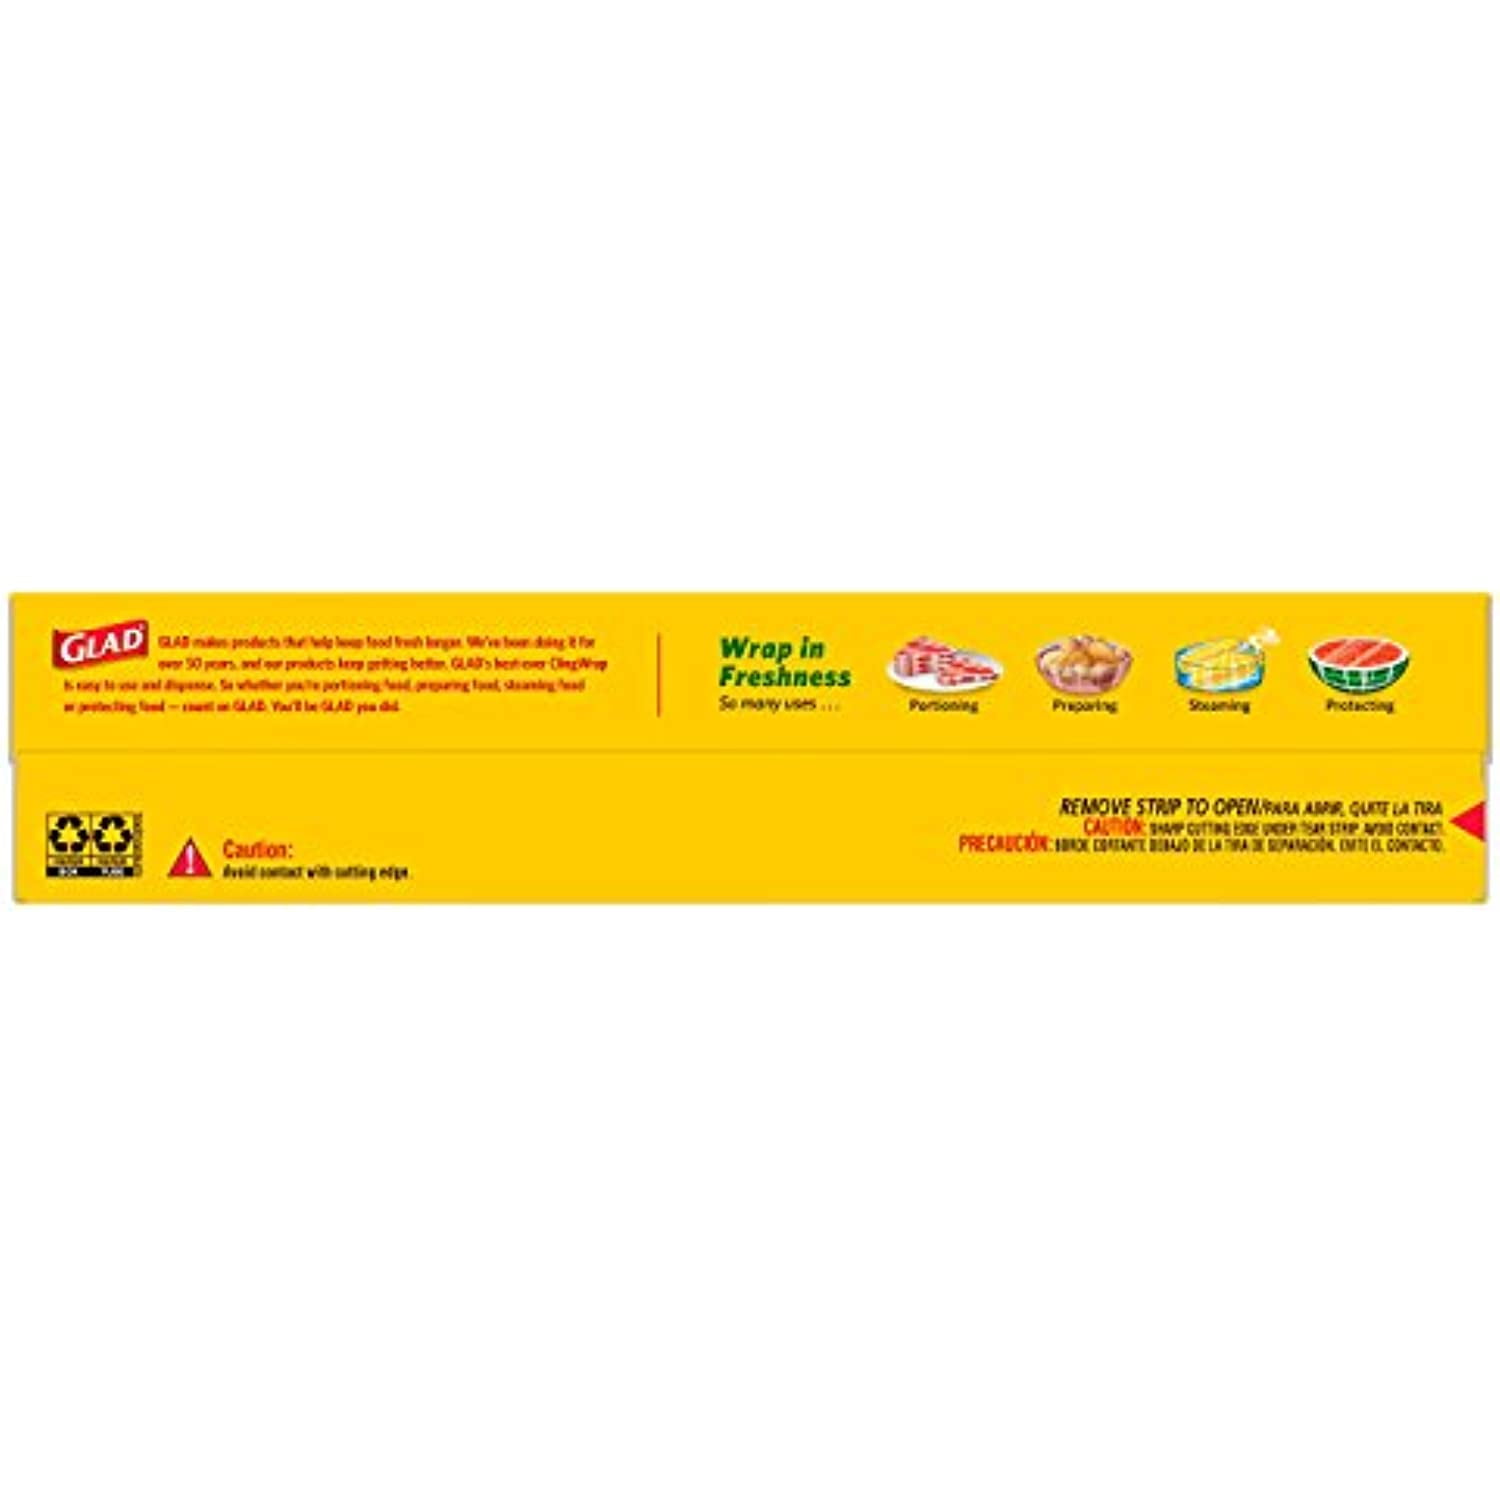 Glad ClingWrap Clear Plastic Food Wrap, 300 sq ft - Fry's Food Stores